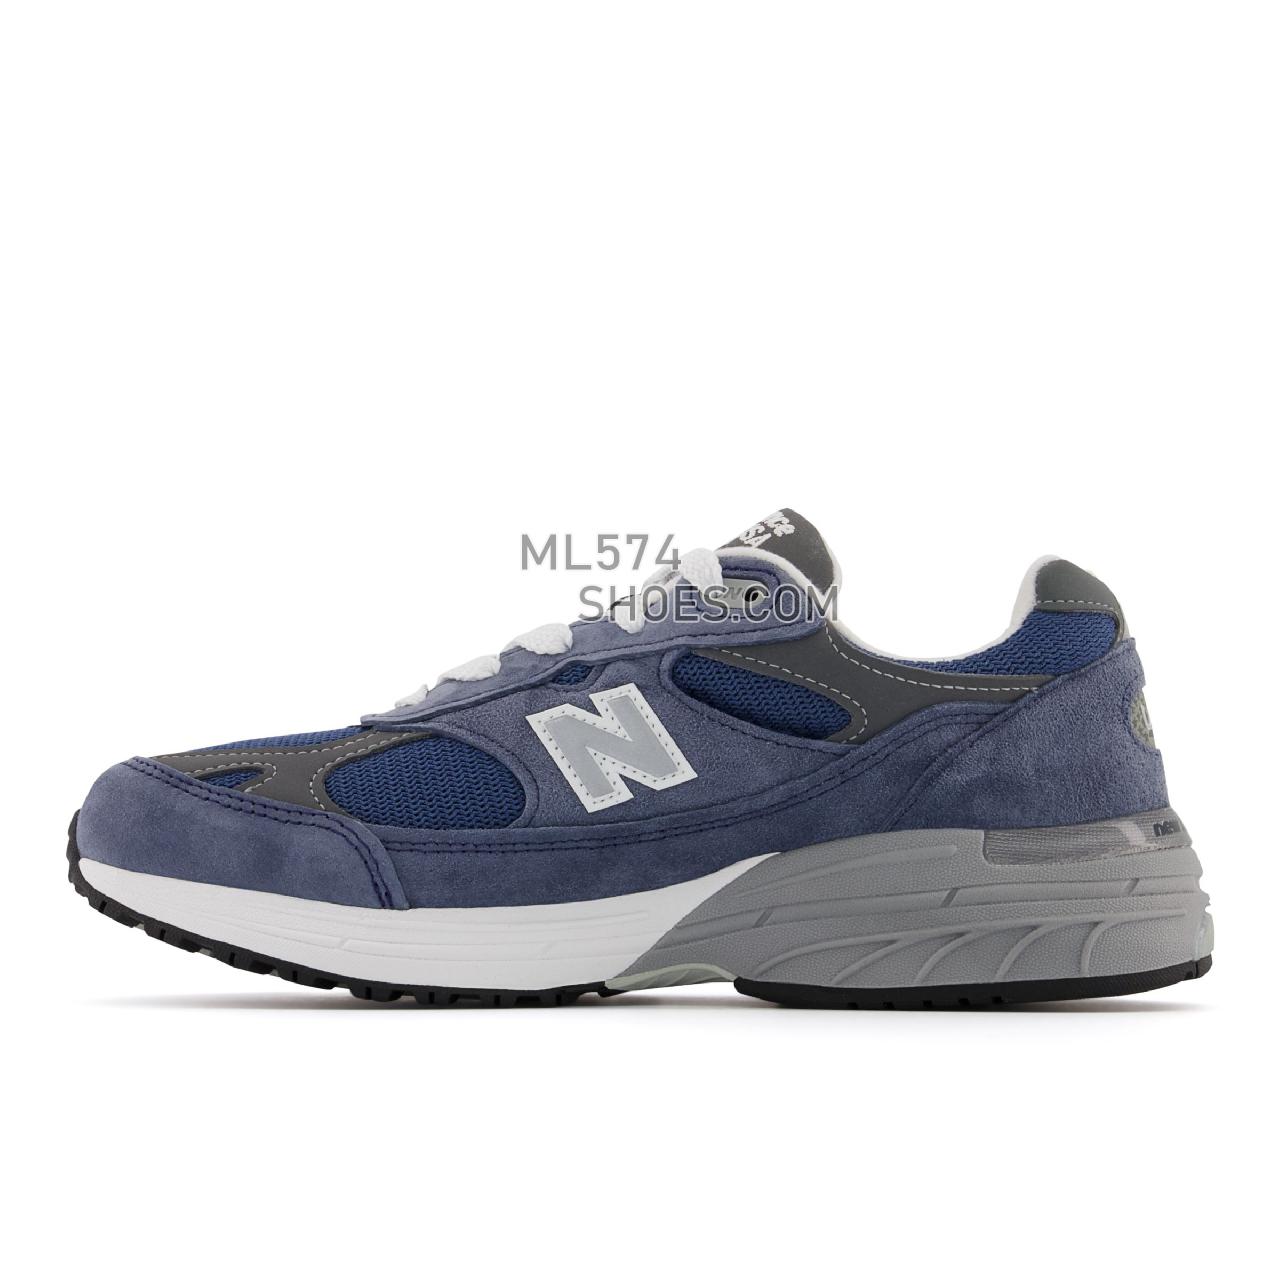 New Balance Made in USA 993 - Women's Classic Sneakers - Indigo with Grey - WR993VI